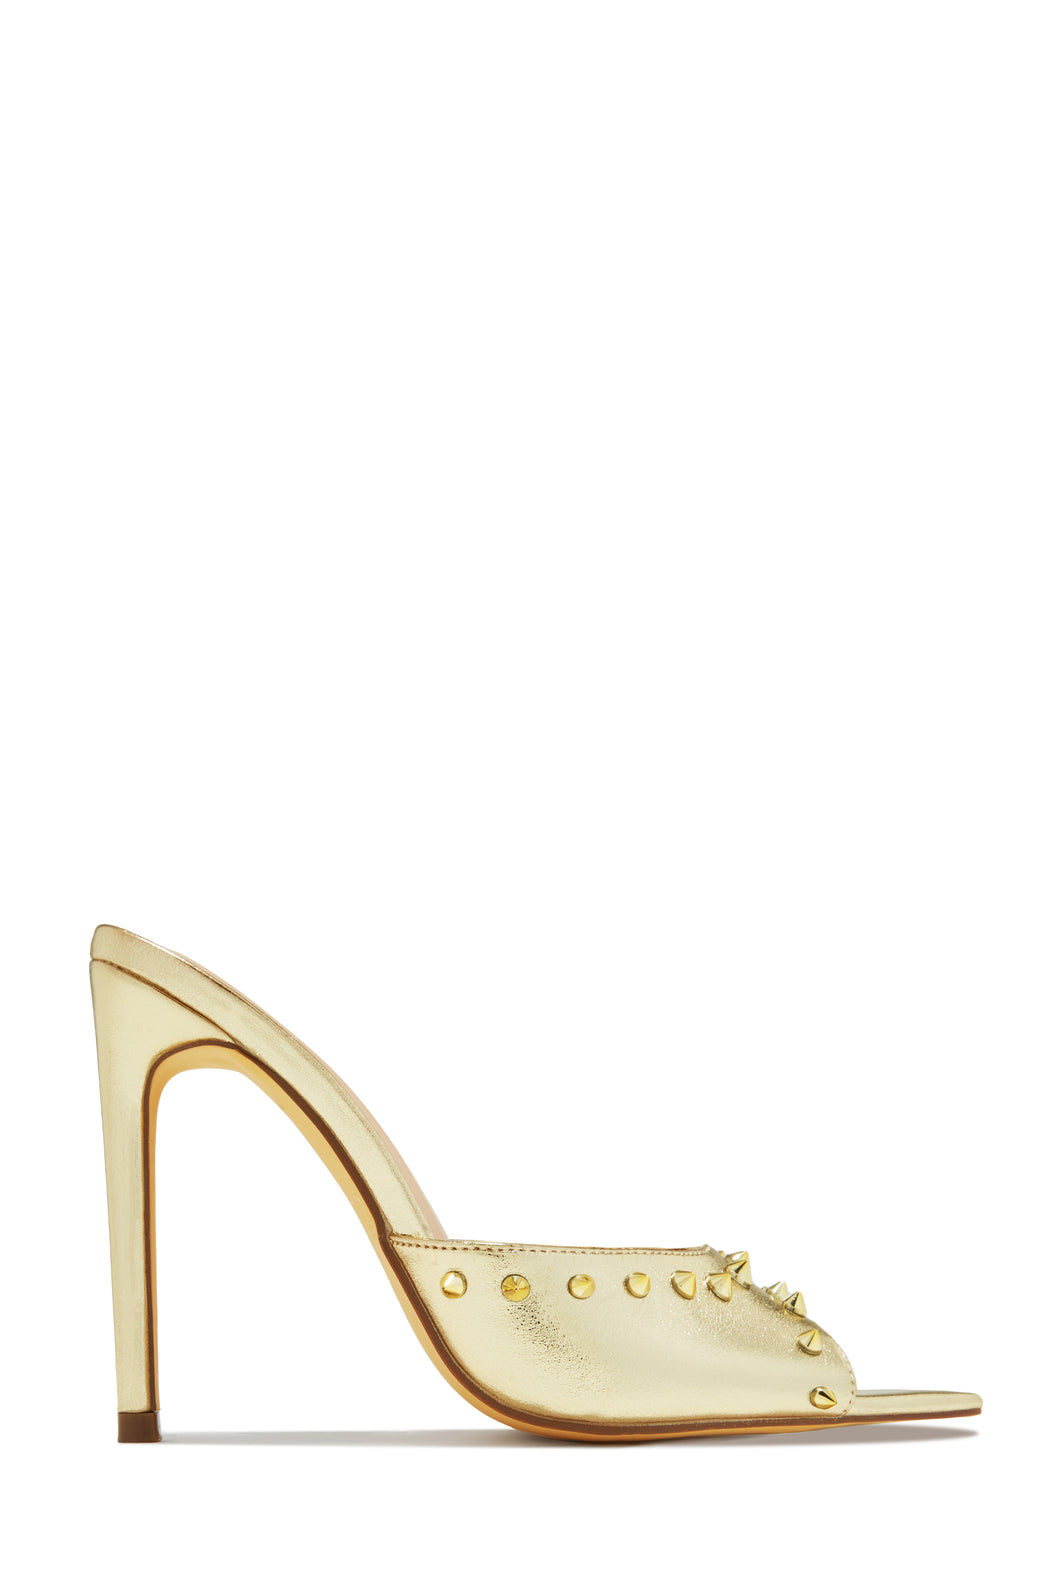 Collette Studded High Heel Mules - Gold